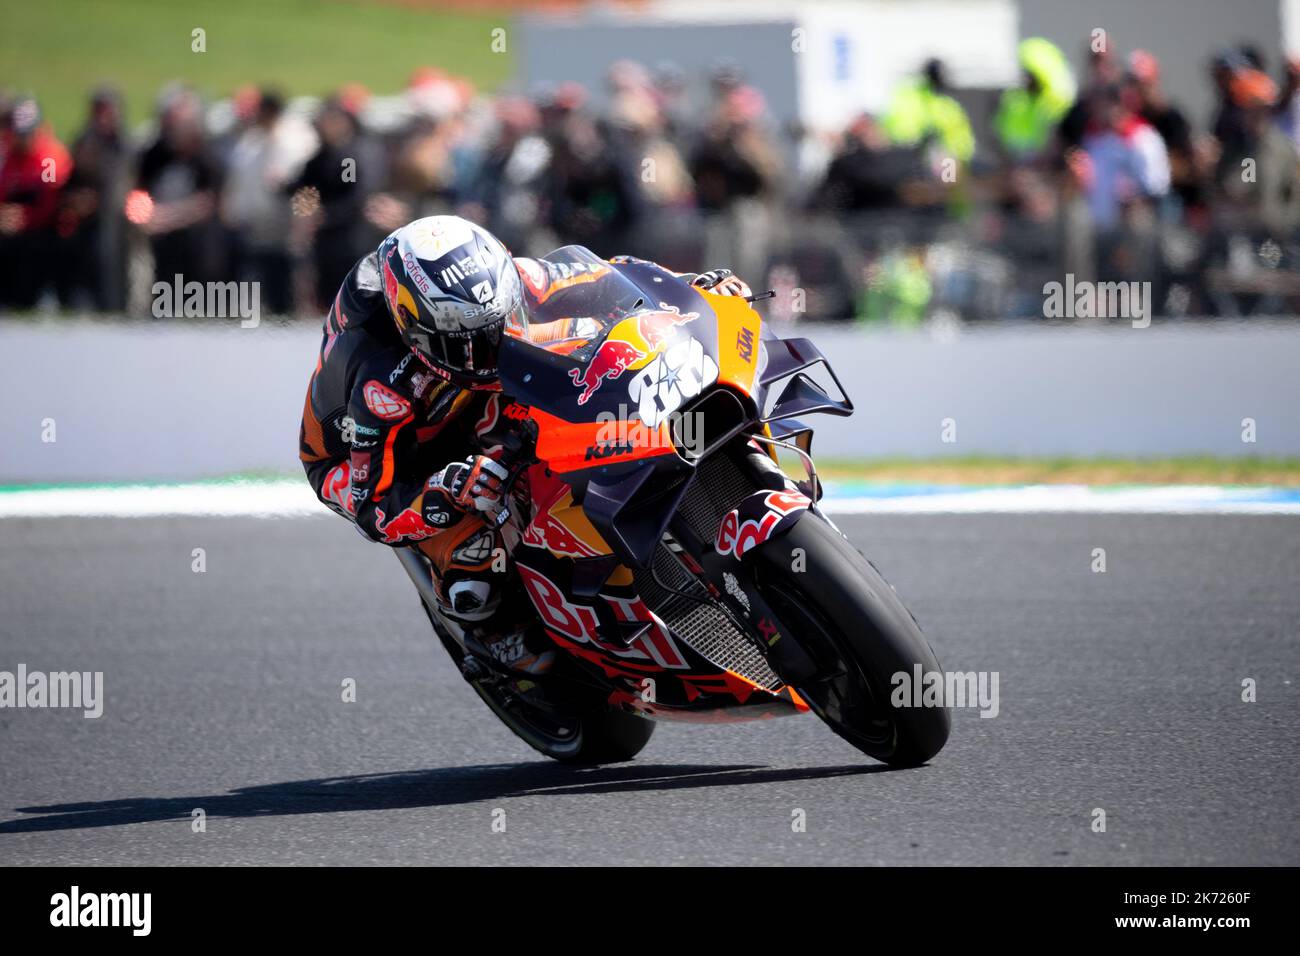 Phillip Island, Australia, 16 October, 2022. Miguel Oliveira of Portugal on the Red Bull KTM Factory Racing KTM during MotoGP race at The 2022 Australian MotoGP at The Phillip Island Circuit on October 16, 2022 in Phillip Island, Australia. Credit: Dave Hewison/Alamy Live News Stock Photo